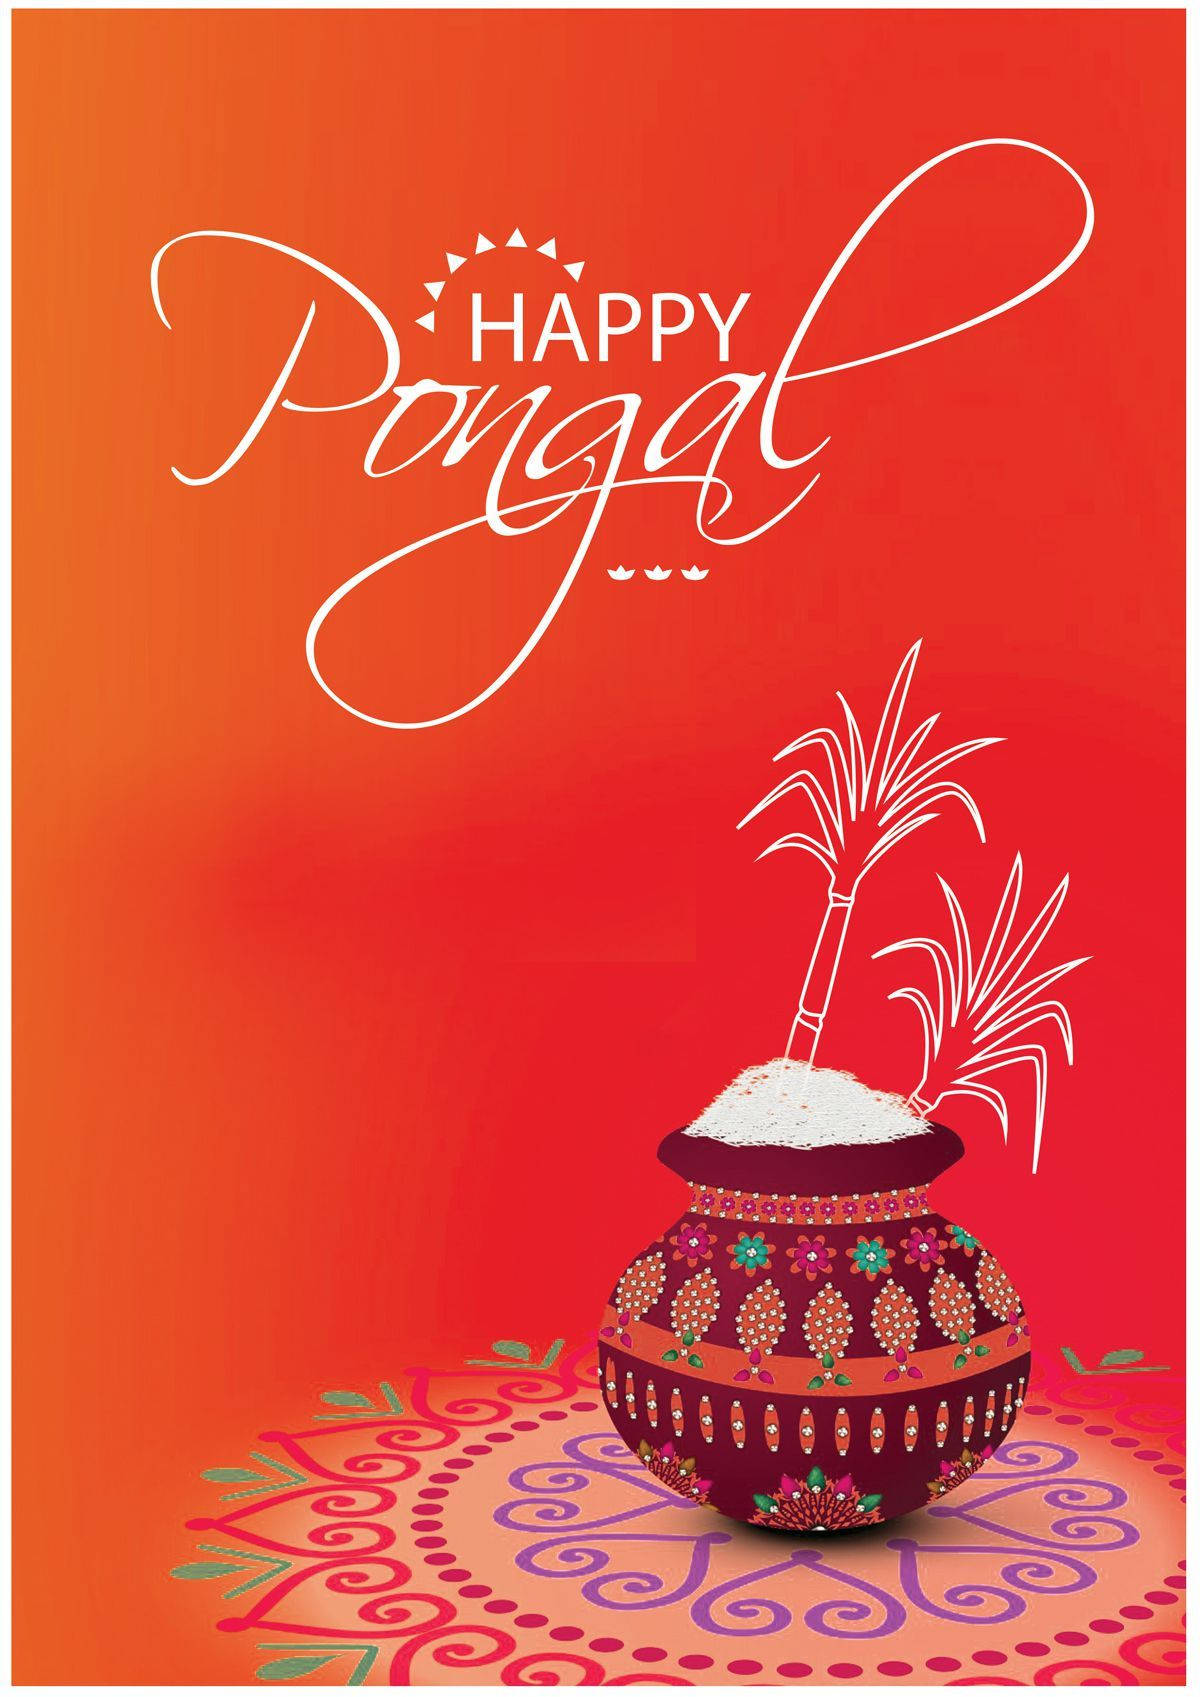 Happy Pongal Festivity Greetings Picture